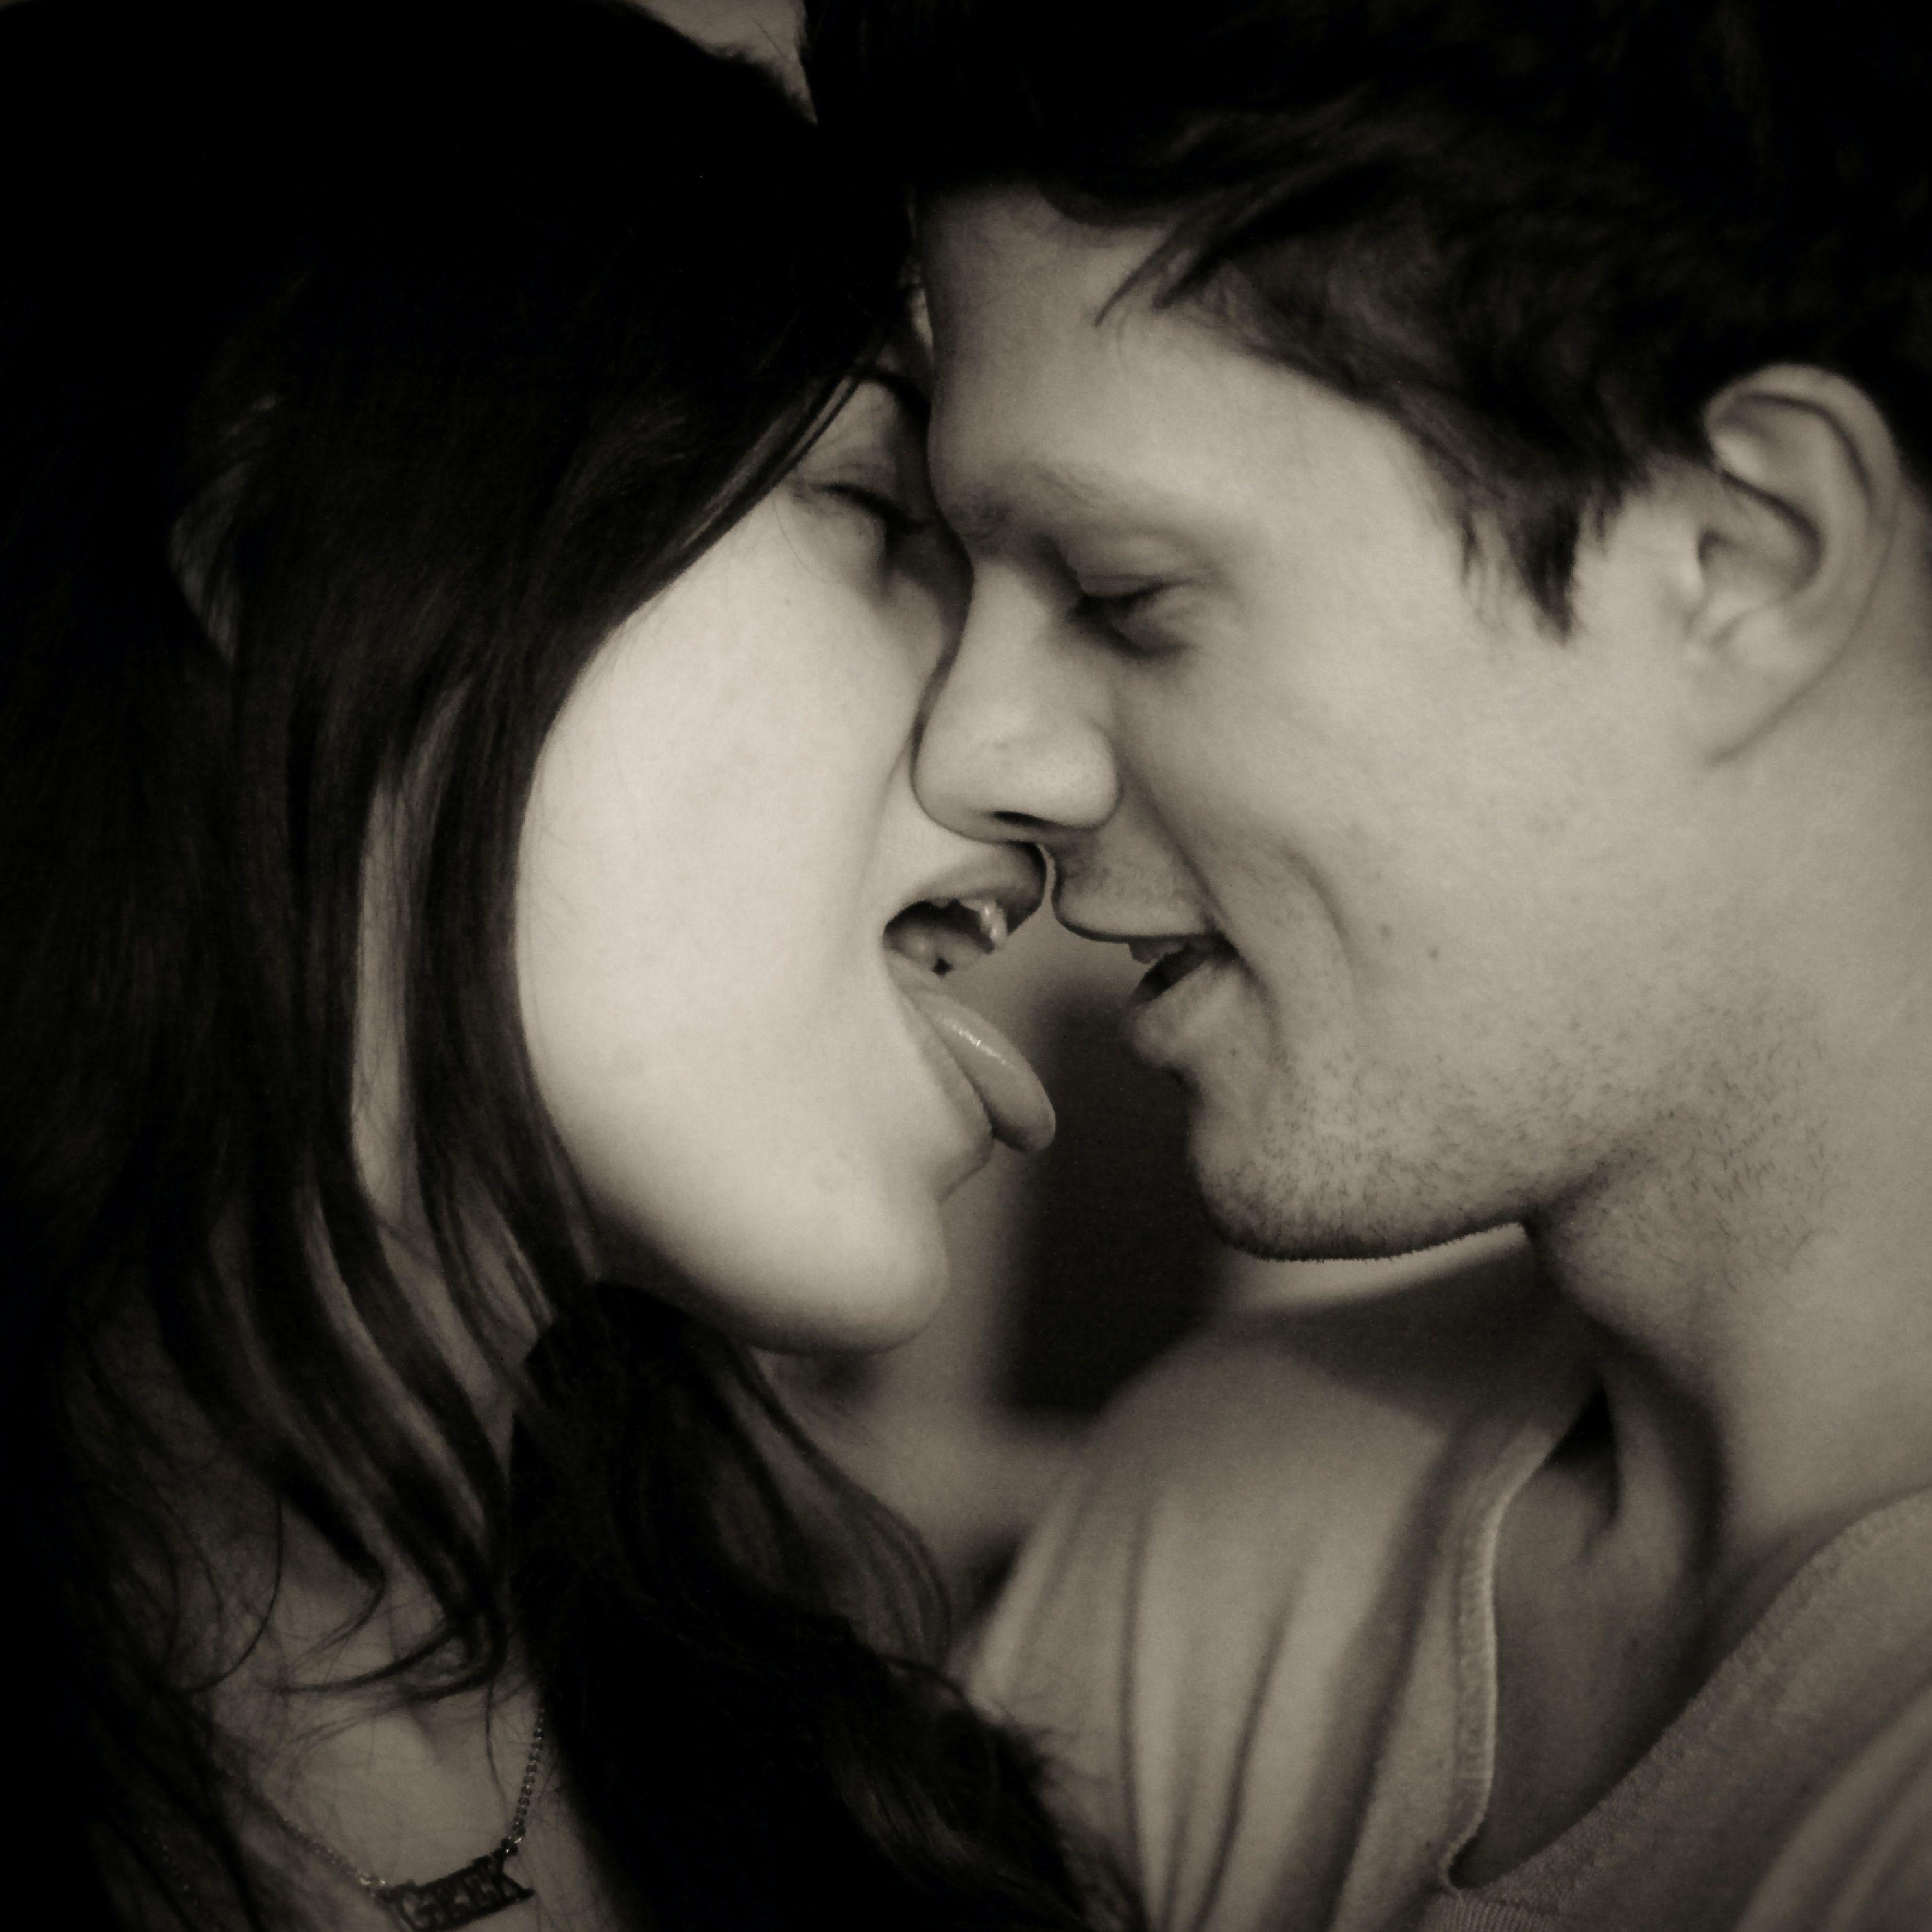 Reasons for sexual intimacy such as lack of kissing 